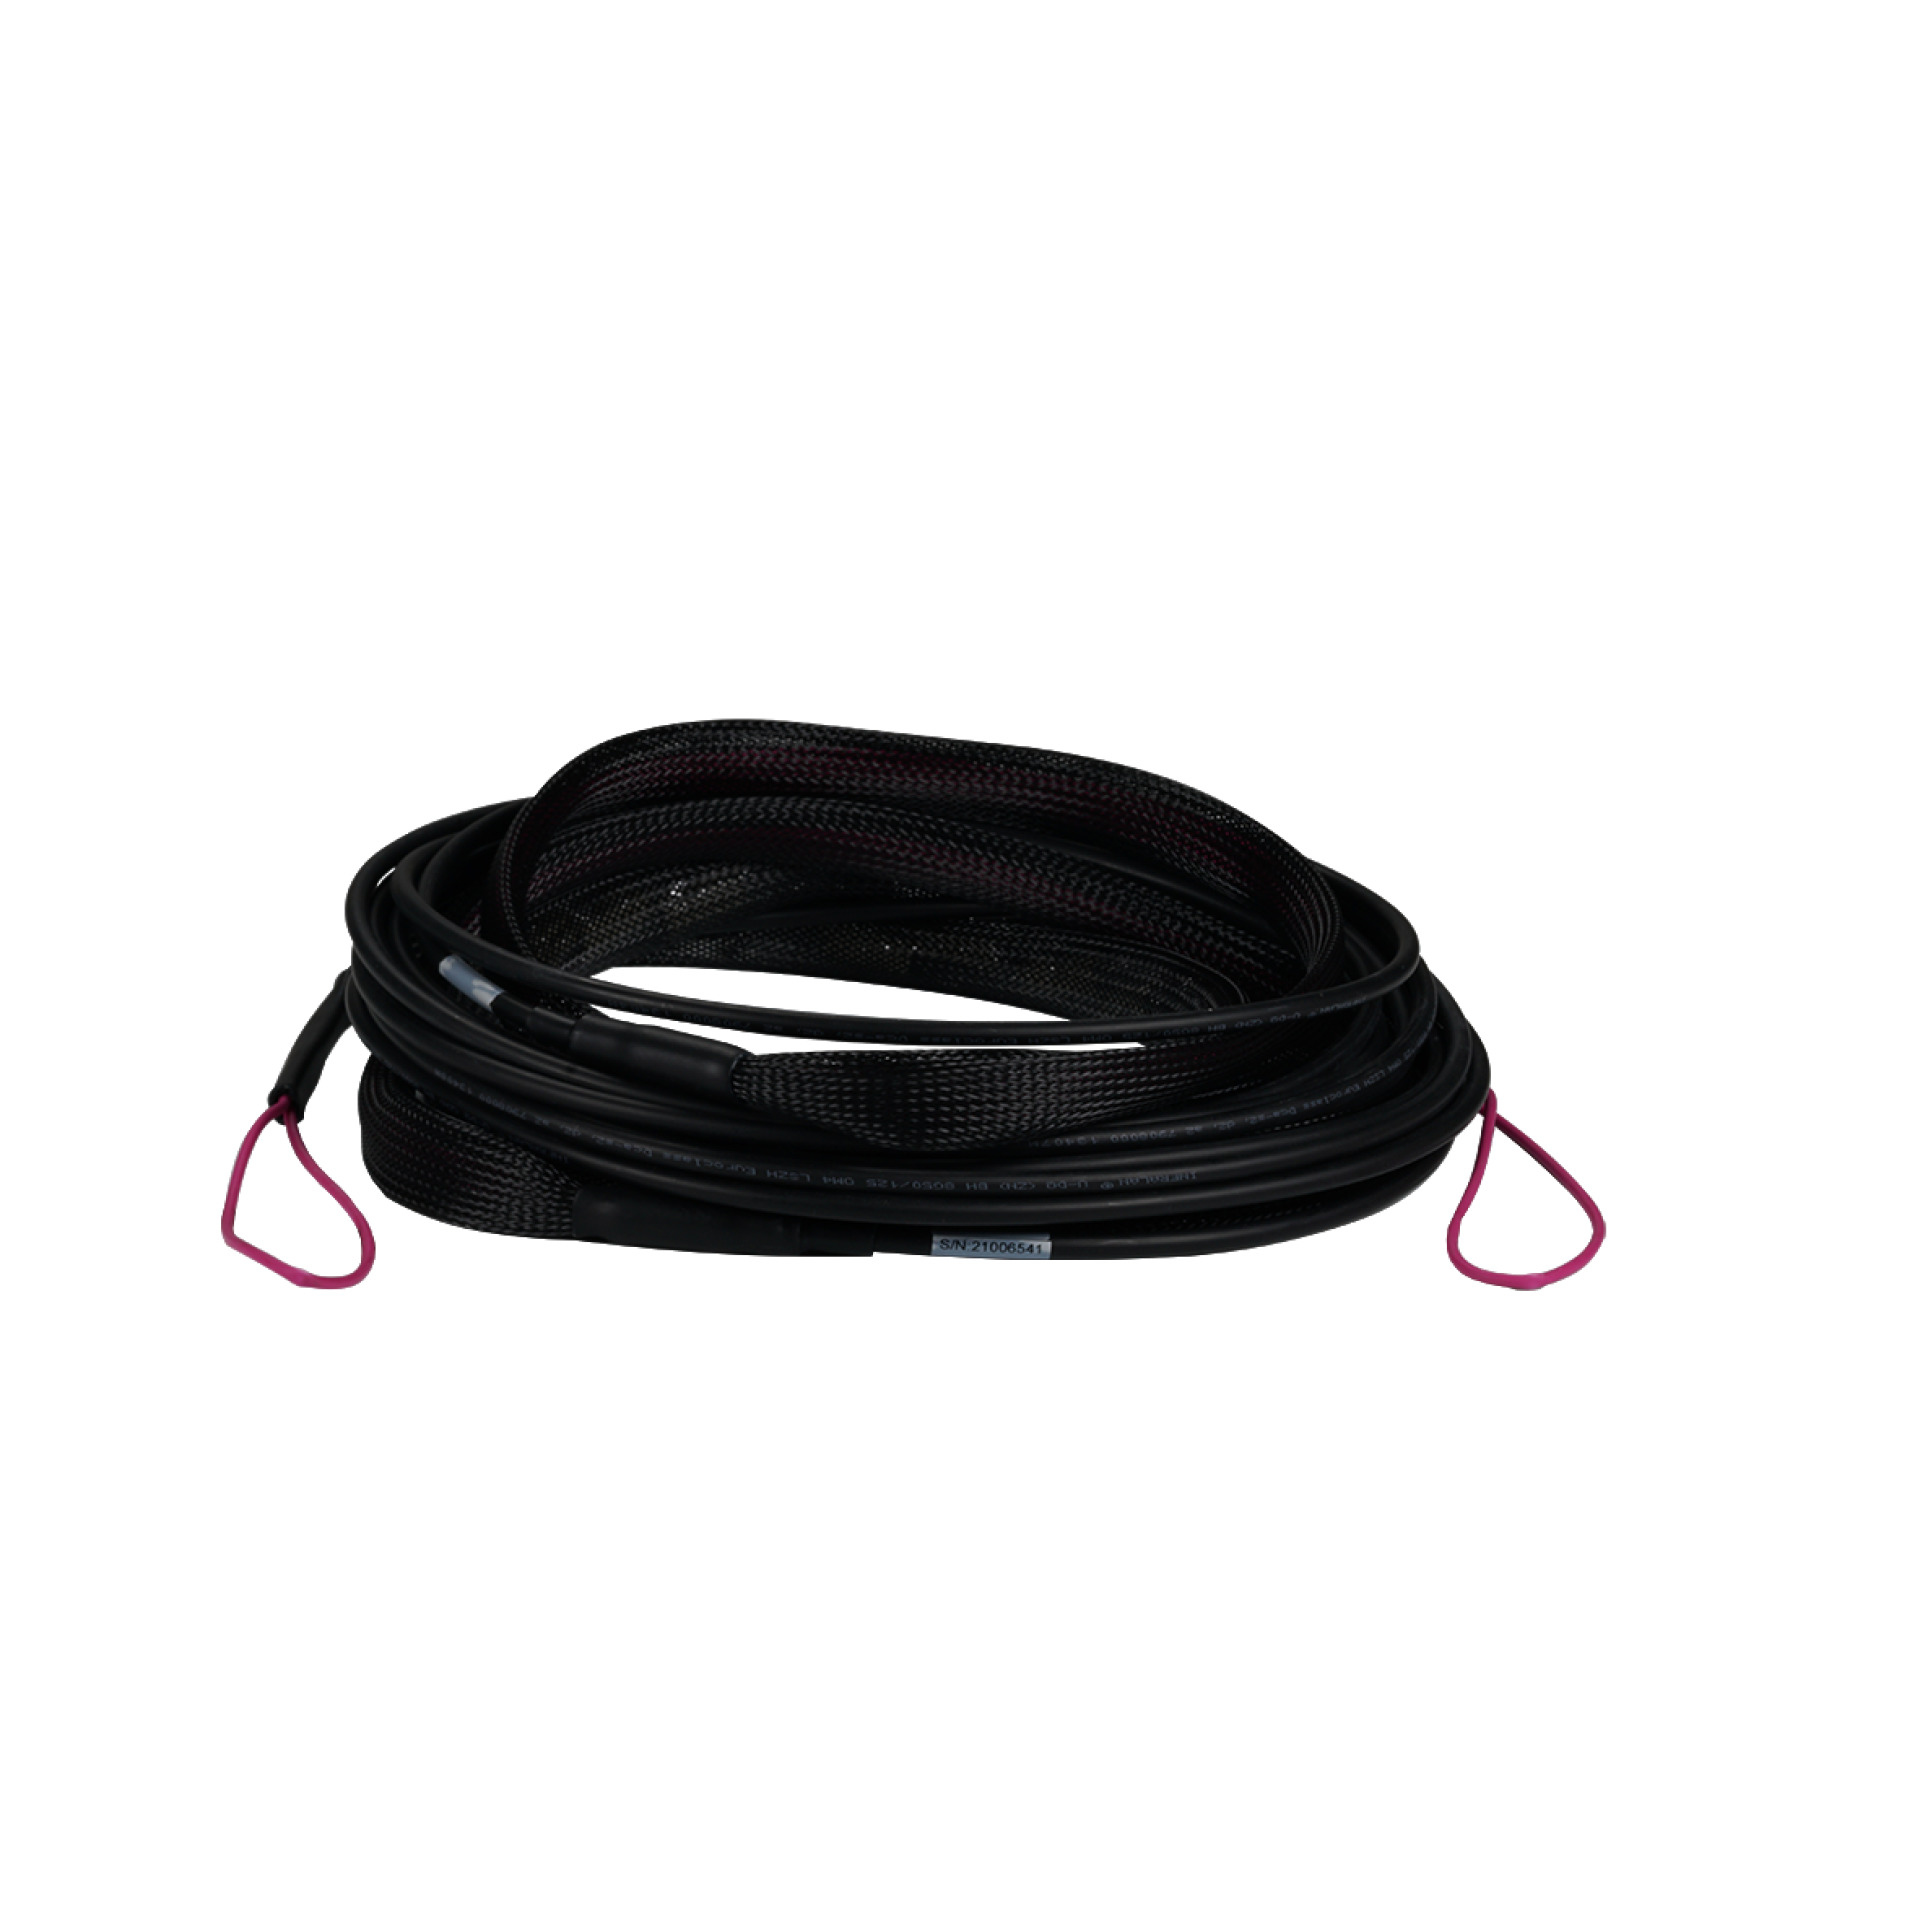 Trunk cable U-DQ(ZN)BH 12G 50/125, SC/SC OM4 160m